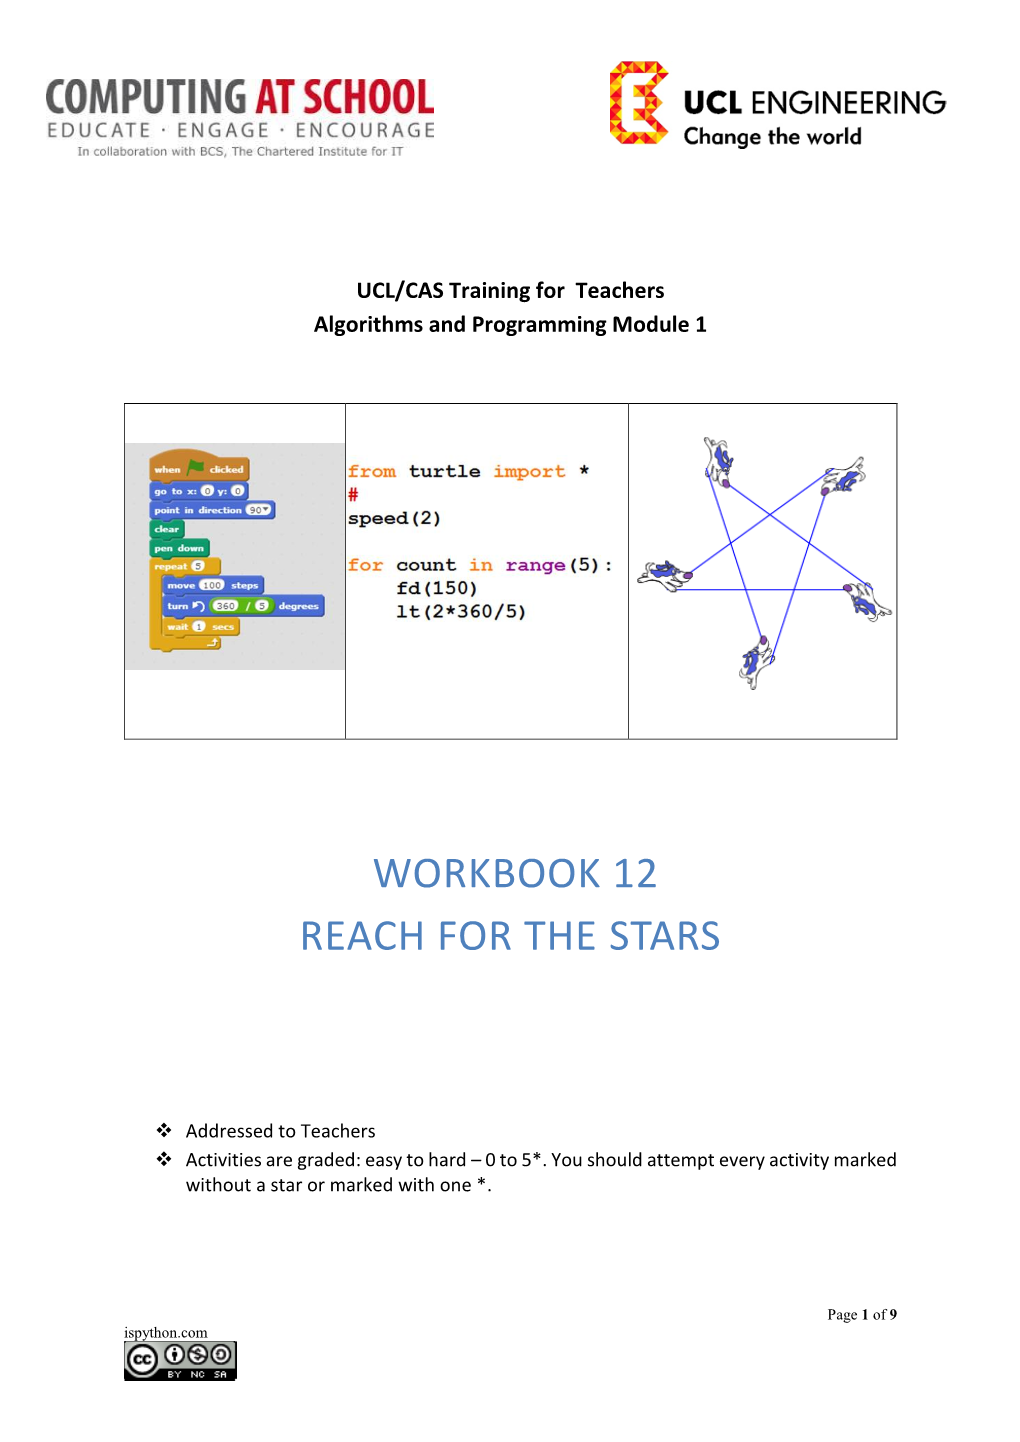 Workbook 12 Reach for the Stars